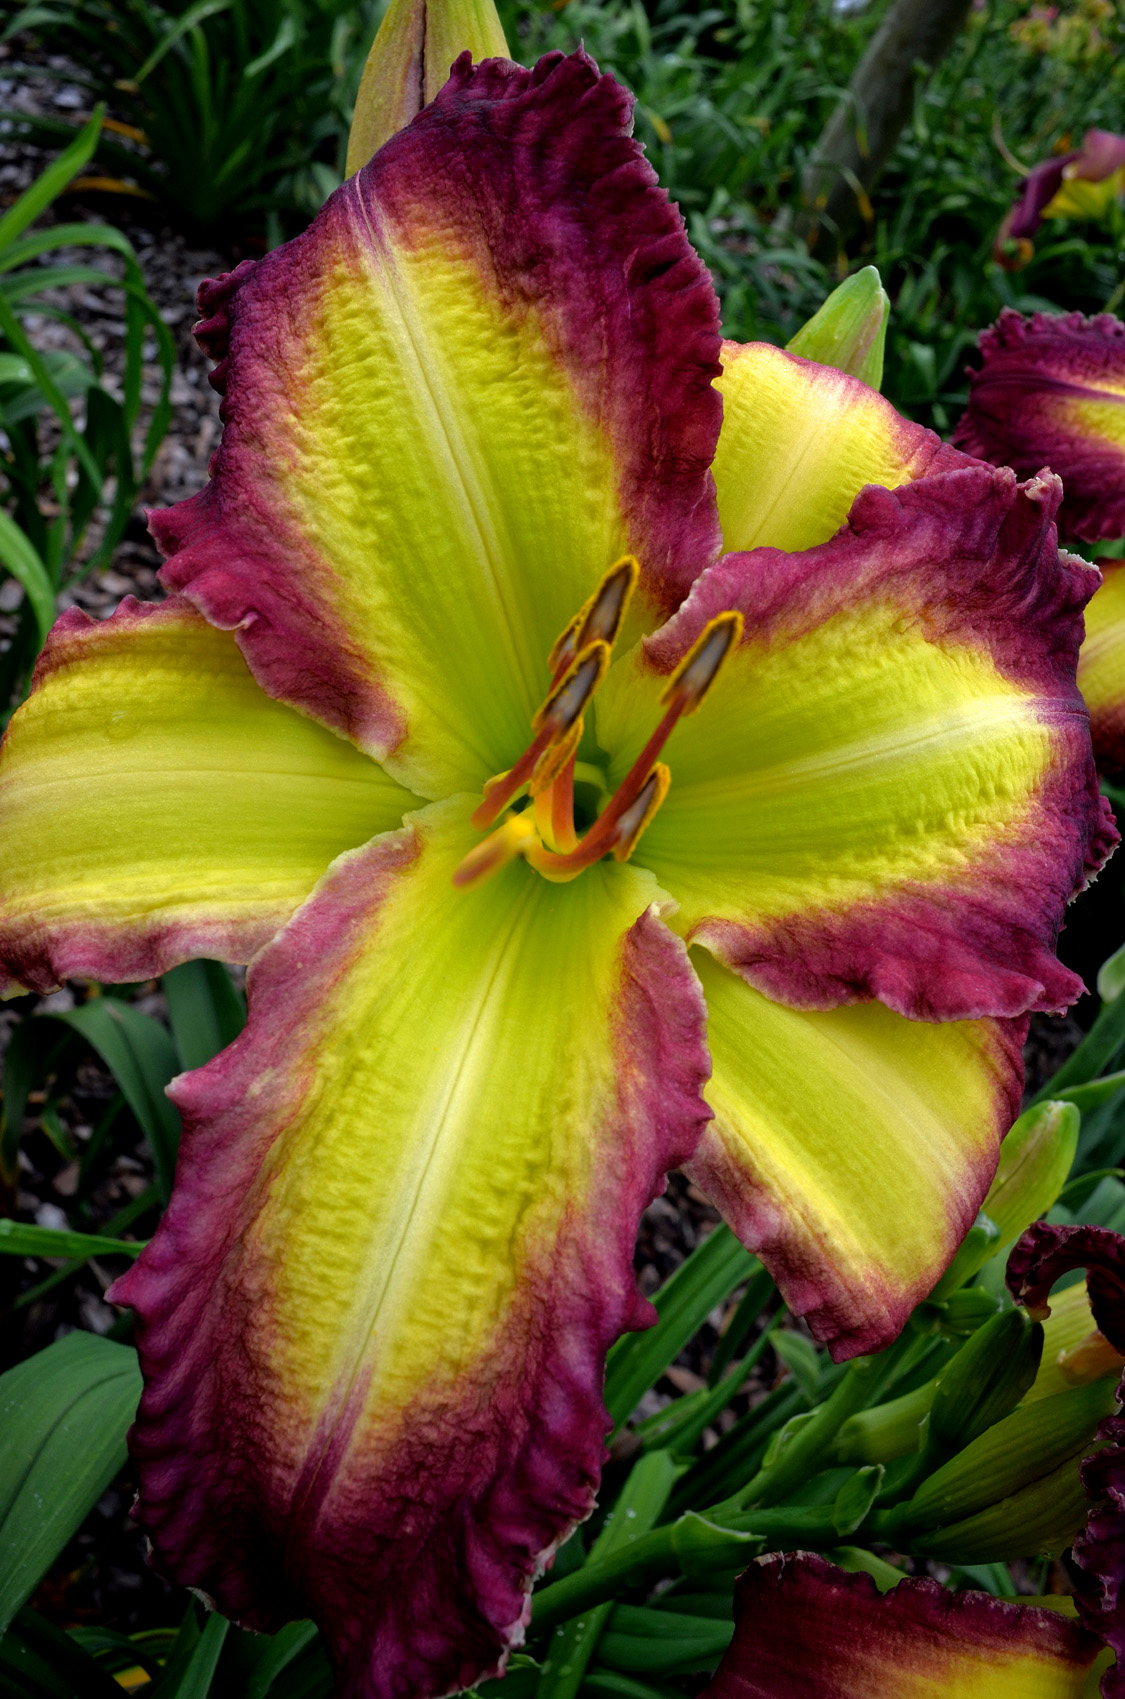 The Red Hammer, Daylily